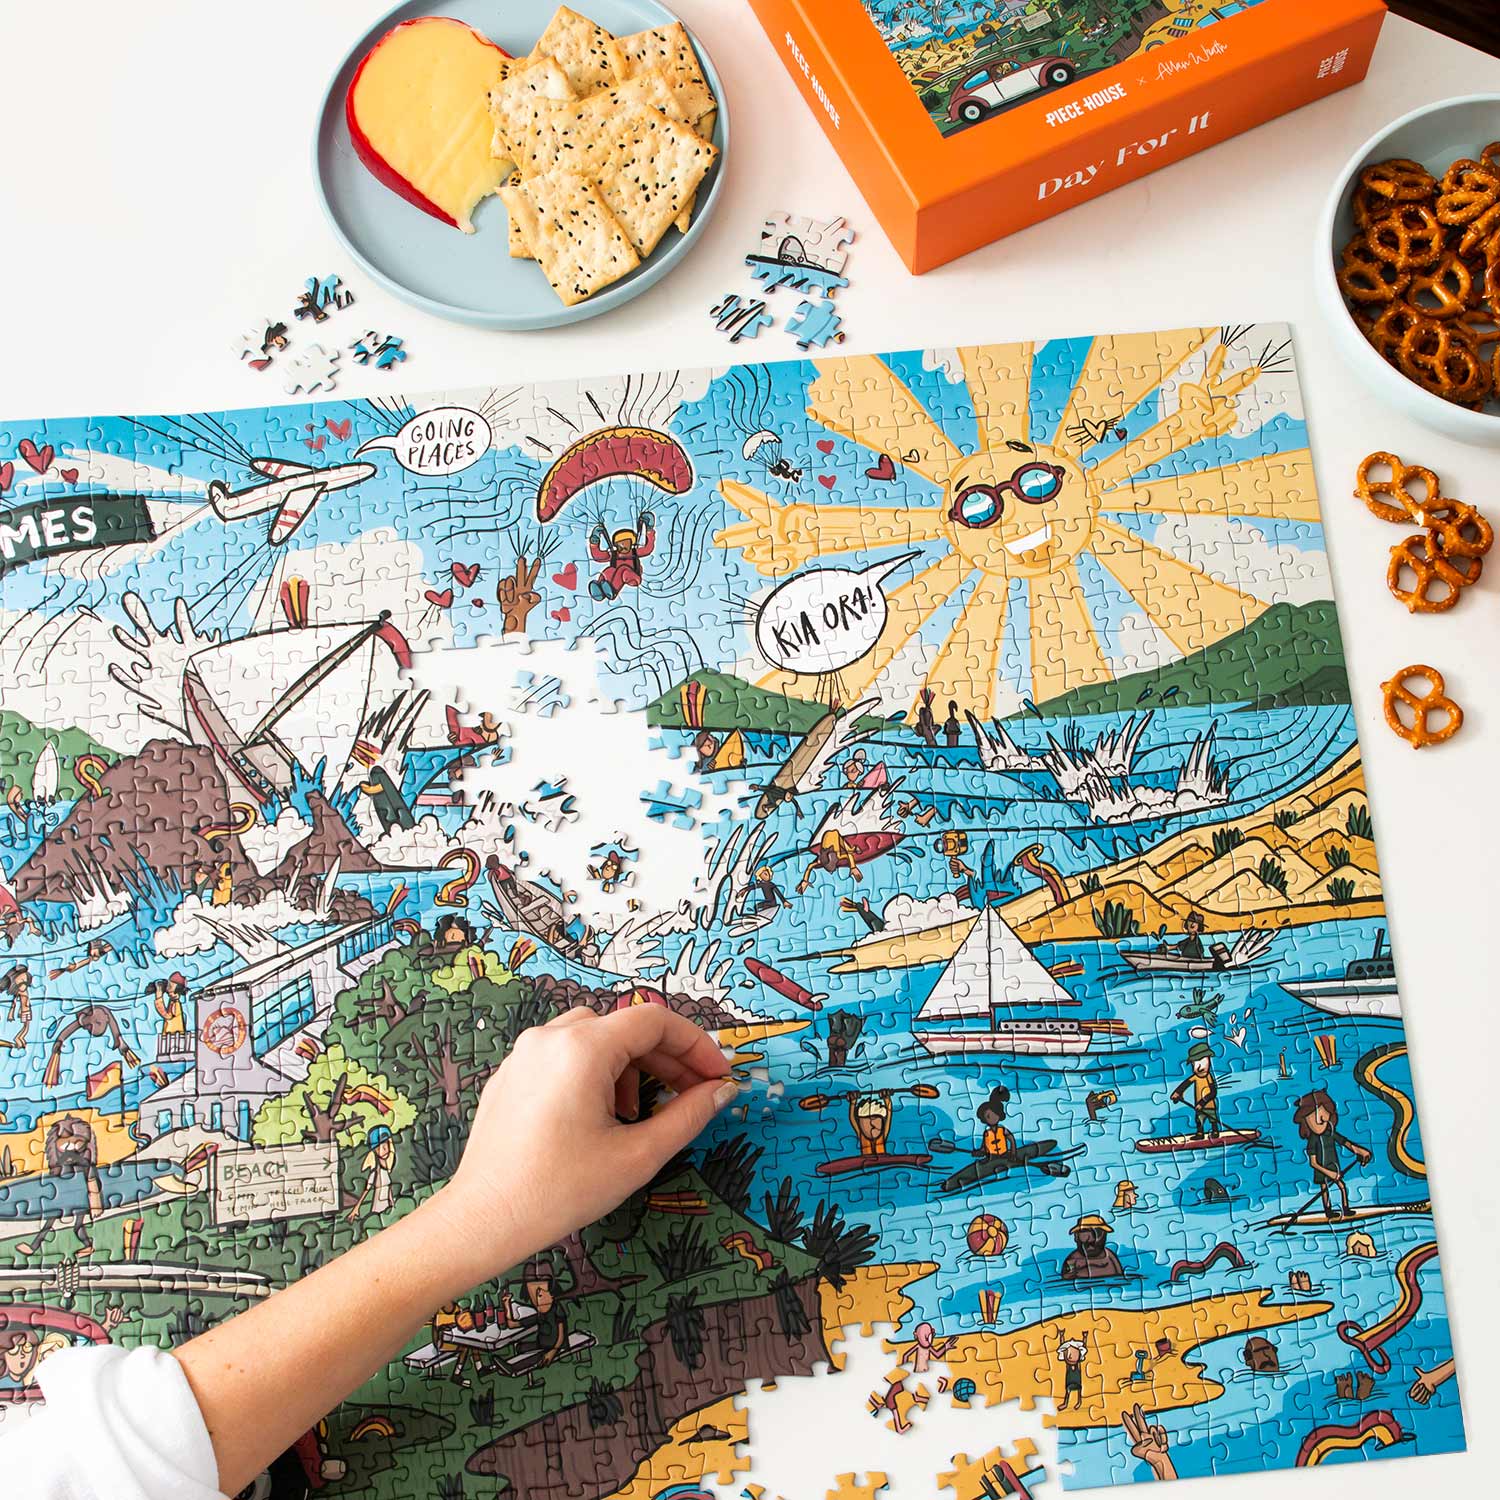 How long does a 1,000 piece puzzle take to complete?